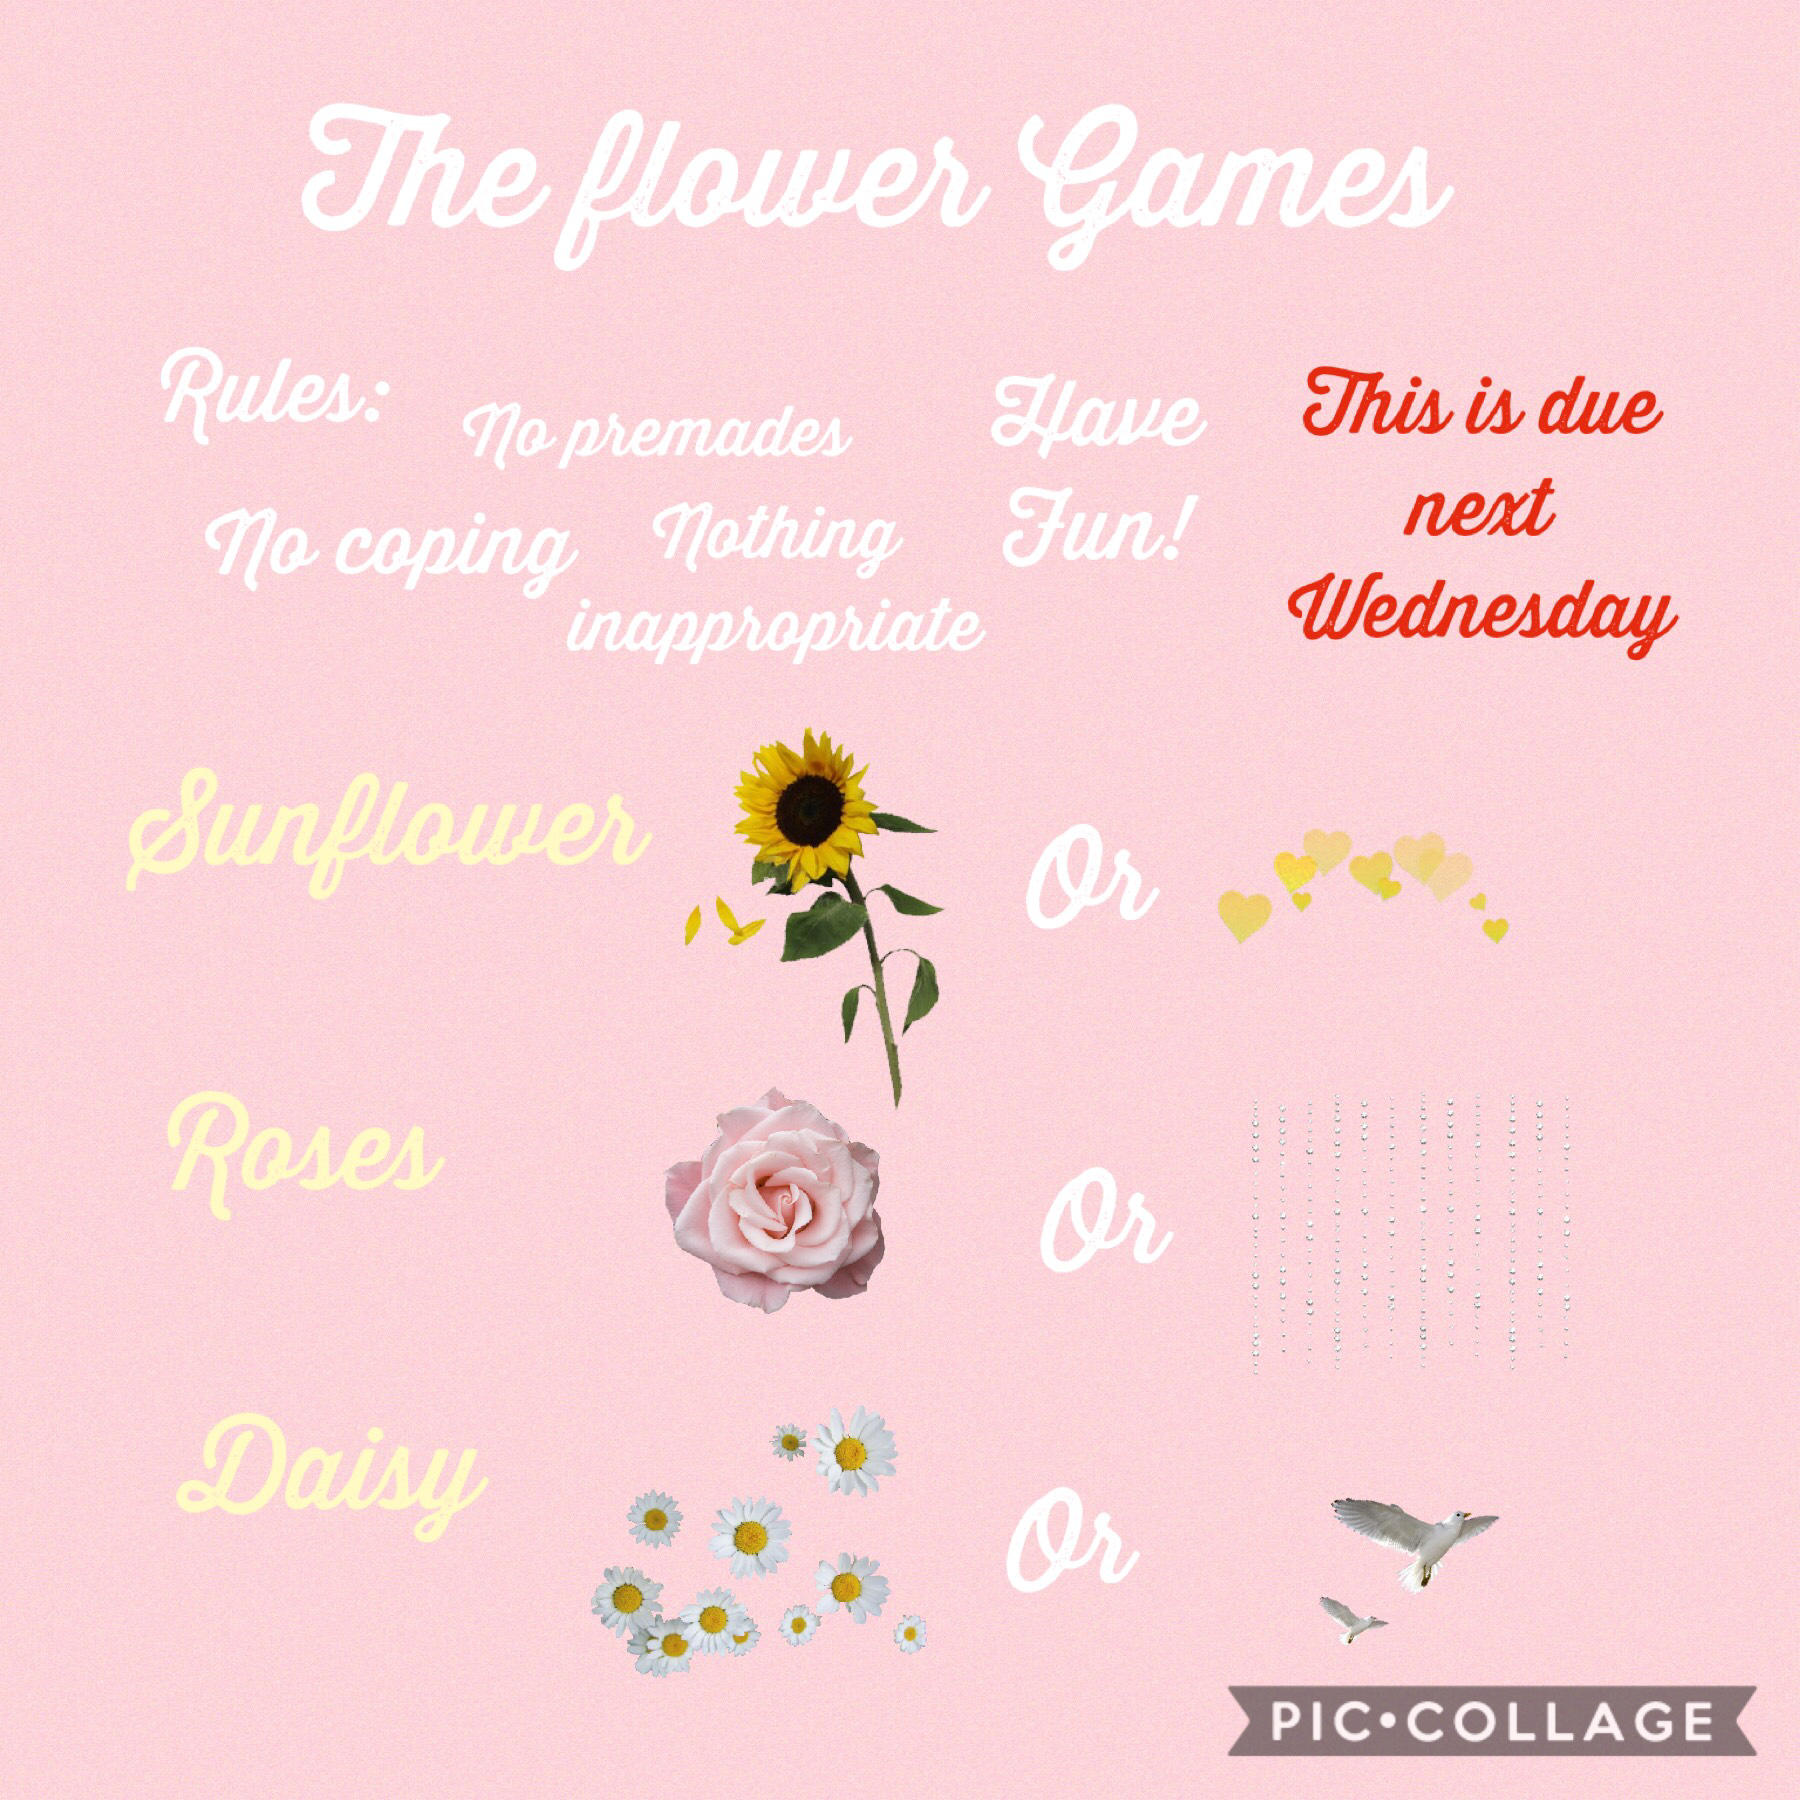 The flower games!